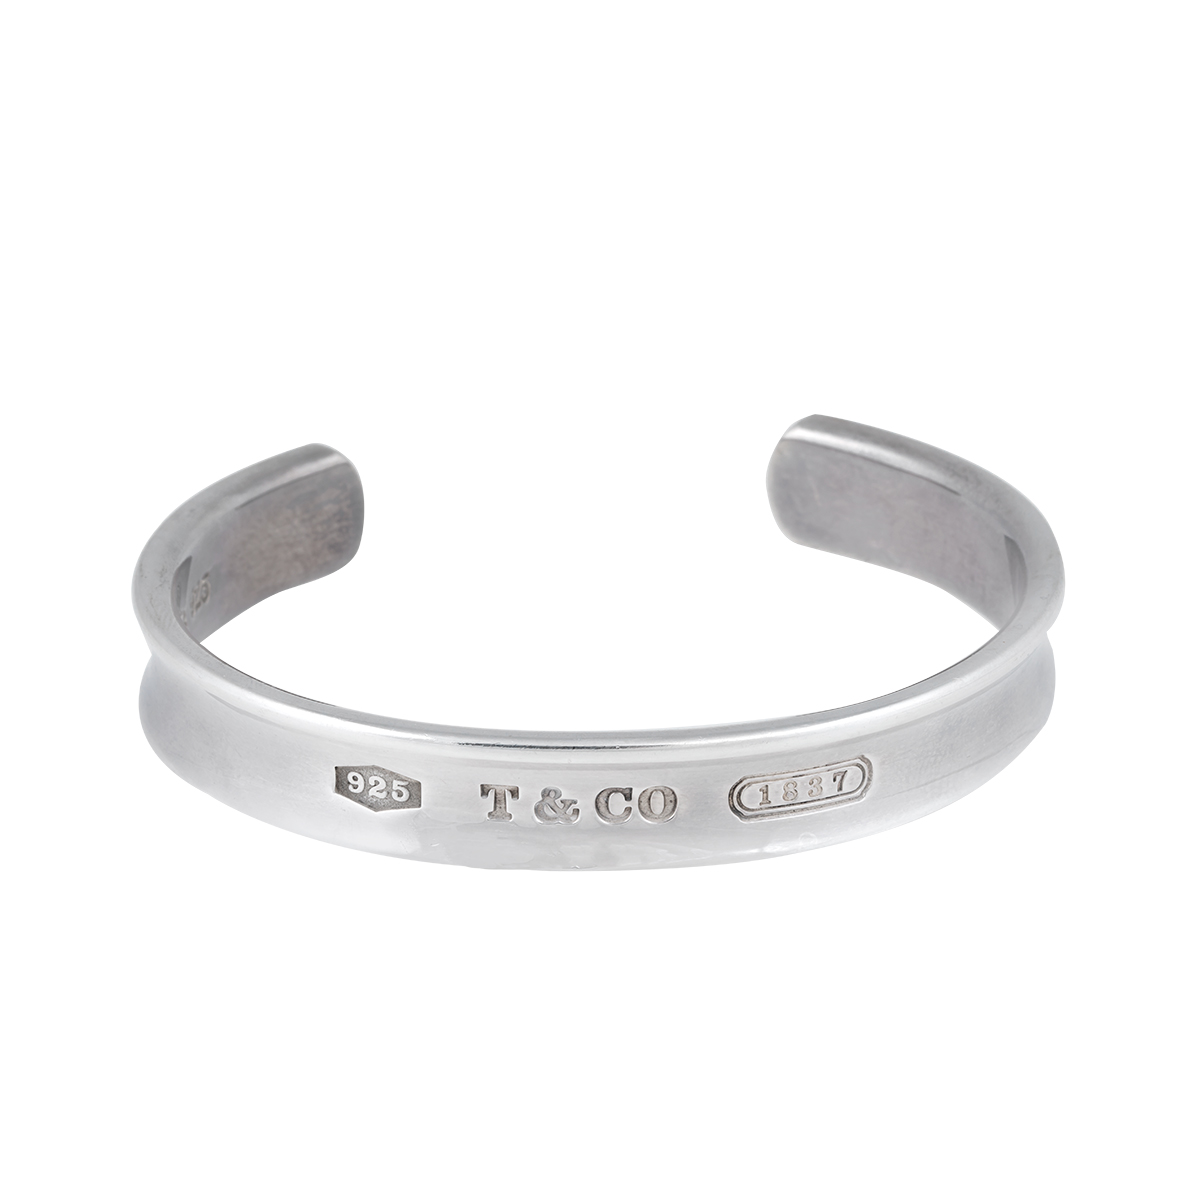 Tiffany  Co New York Notes Love Cuff Bracelet in Sterling Silver  QD  Jewelry